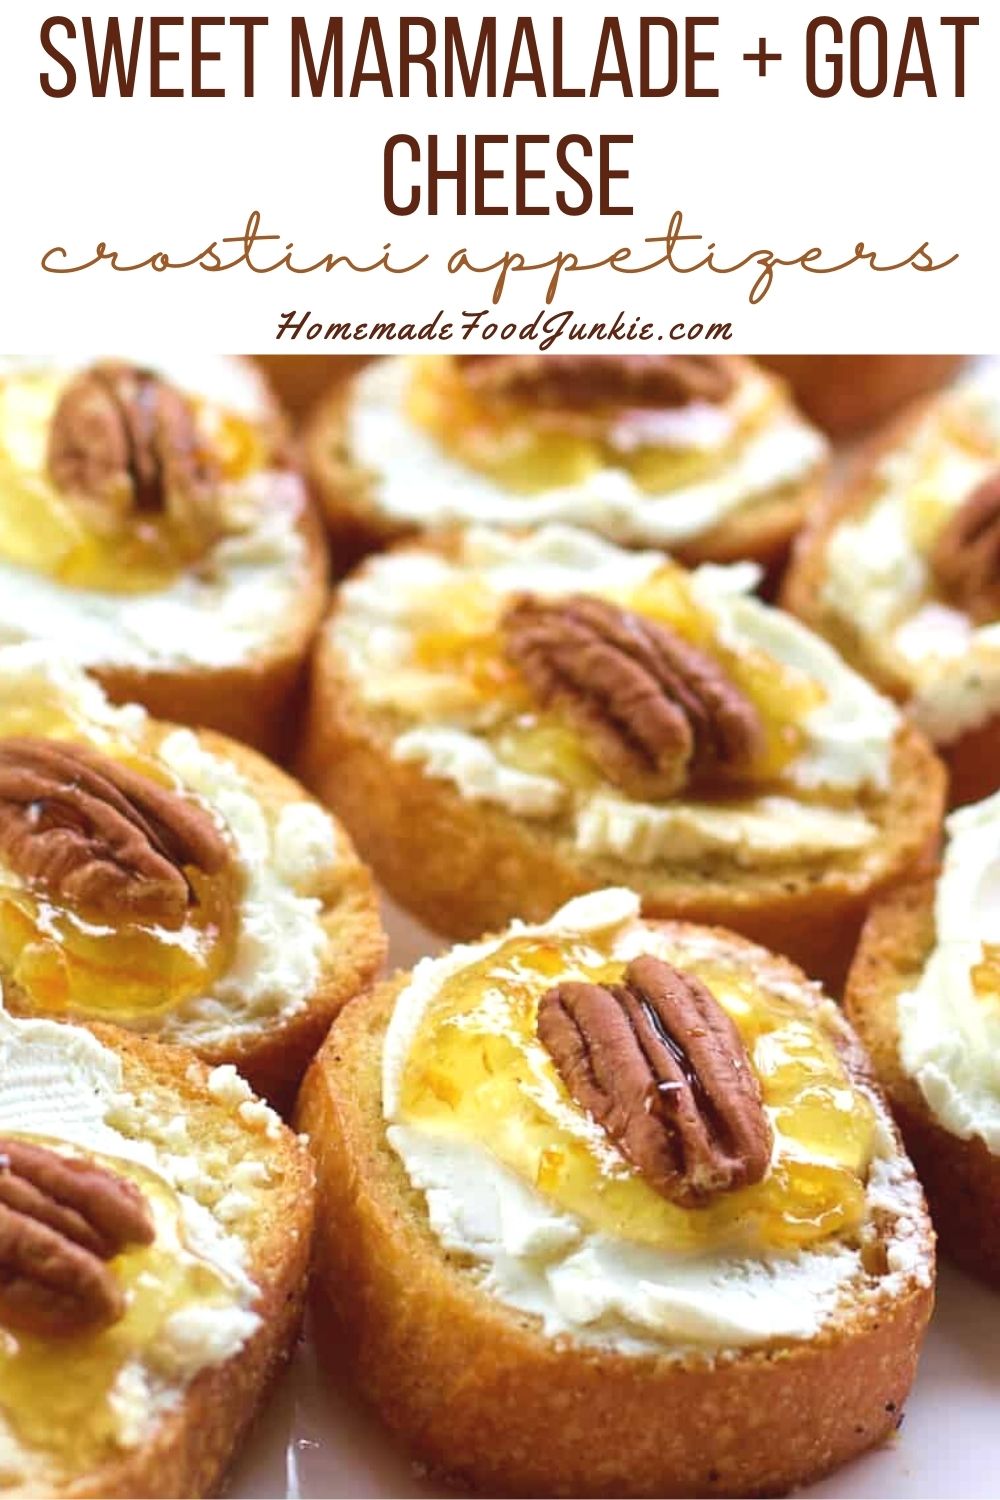 Sweet Marmalade And Goat Cheese Crostini Appetizers-Pin Image